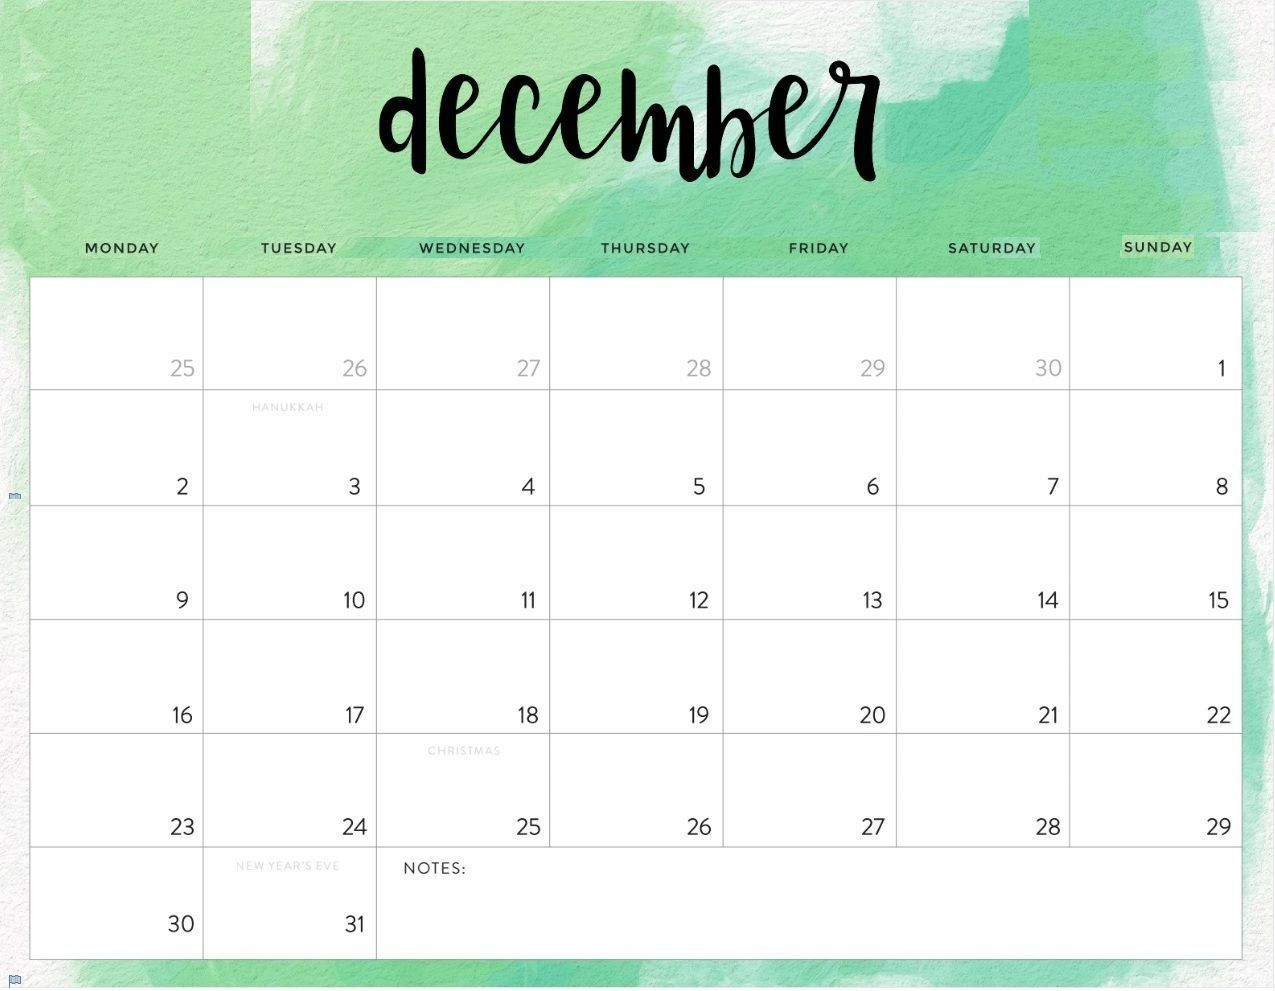 calendars you can edit online 27